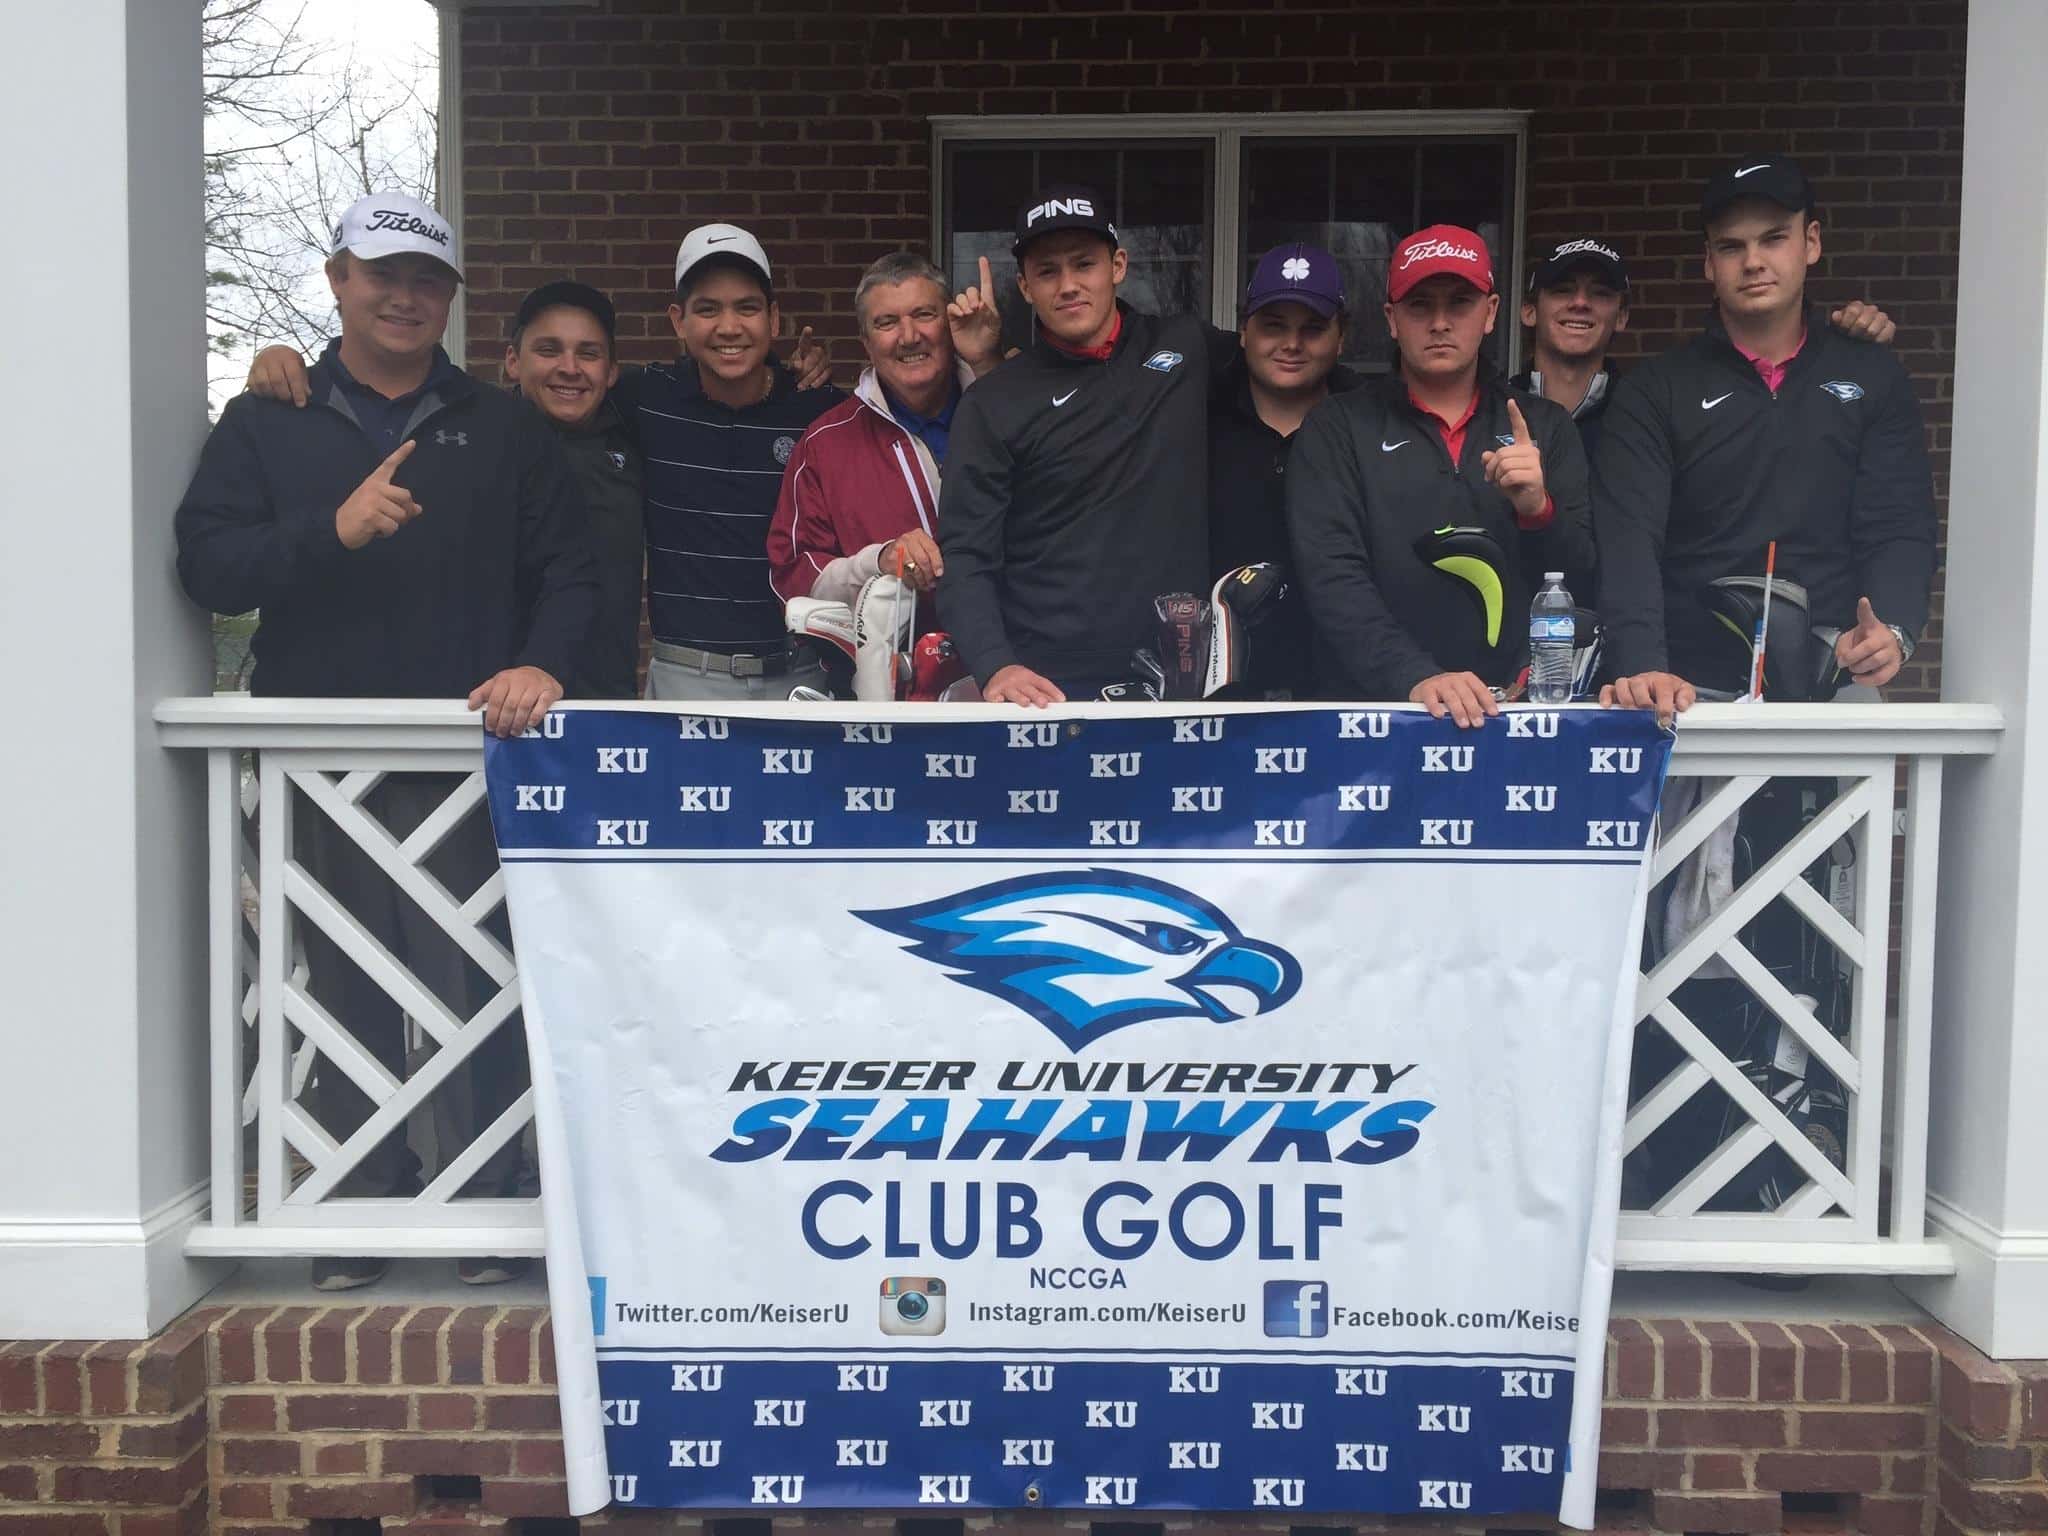 Keiser University Flagship Campus Club Golf Team Finishes 11th in the NCCGA National Championship